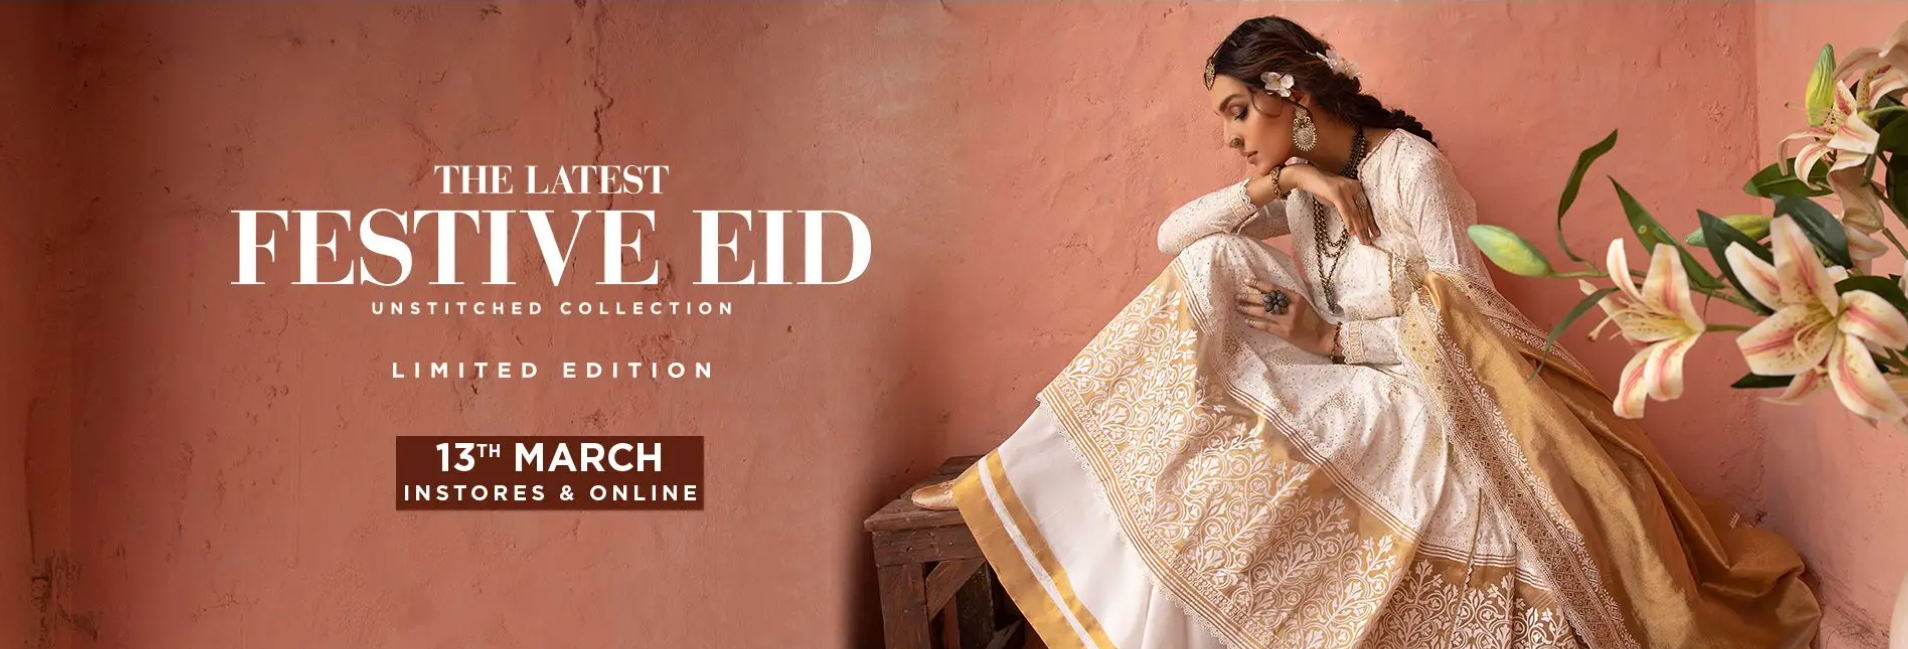 Gul ahmed festive collection